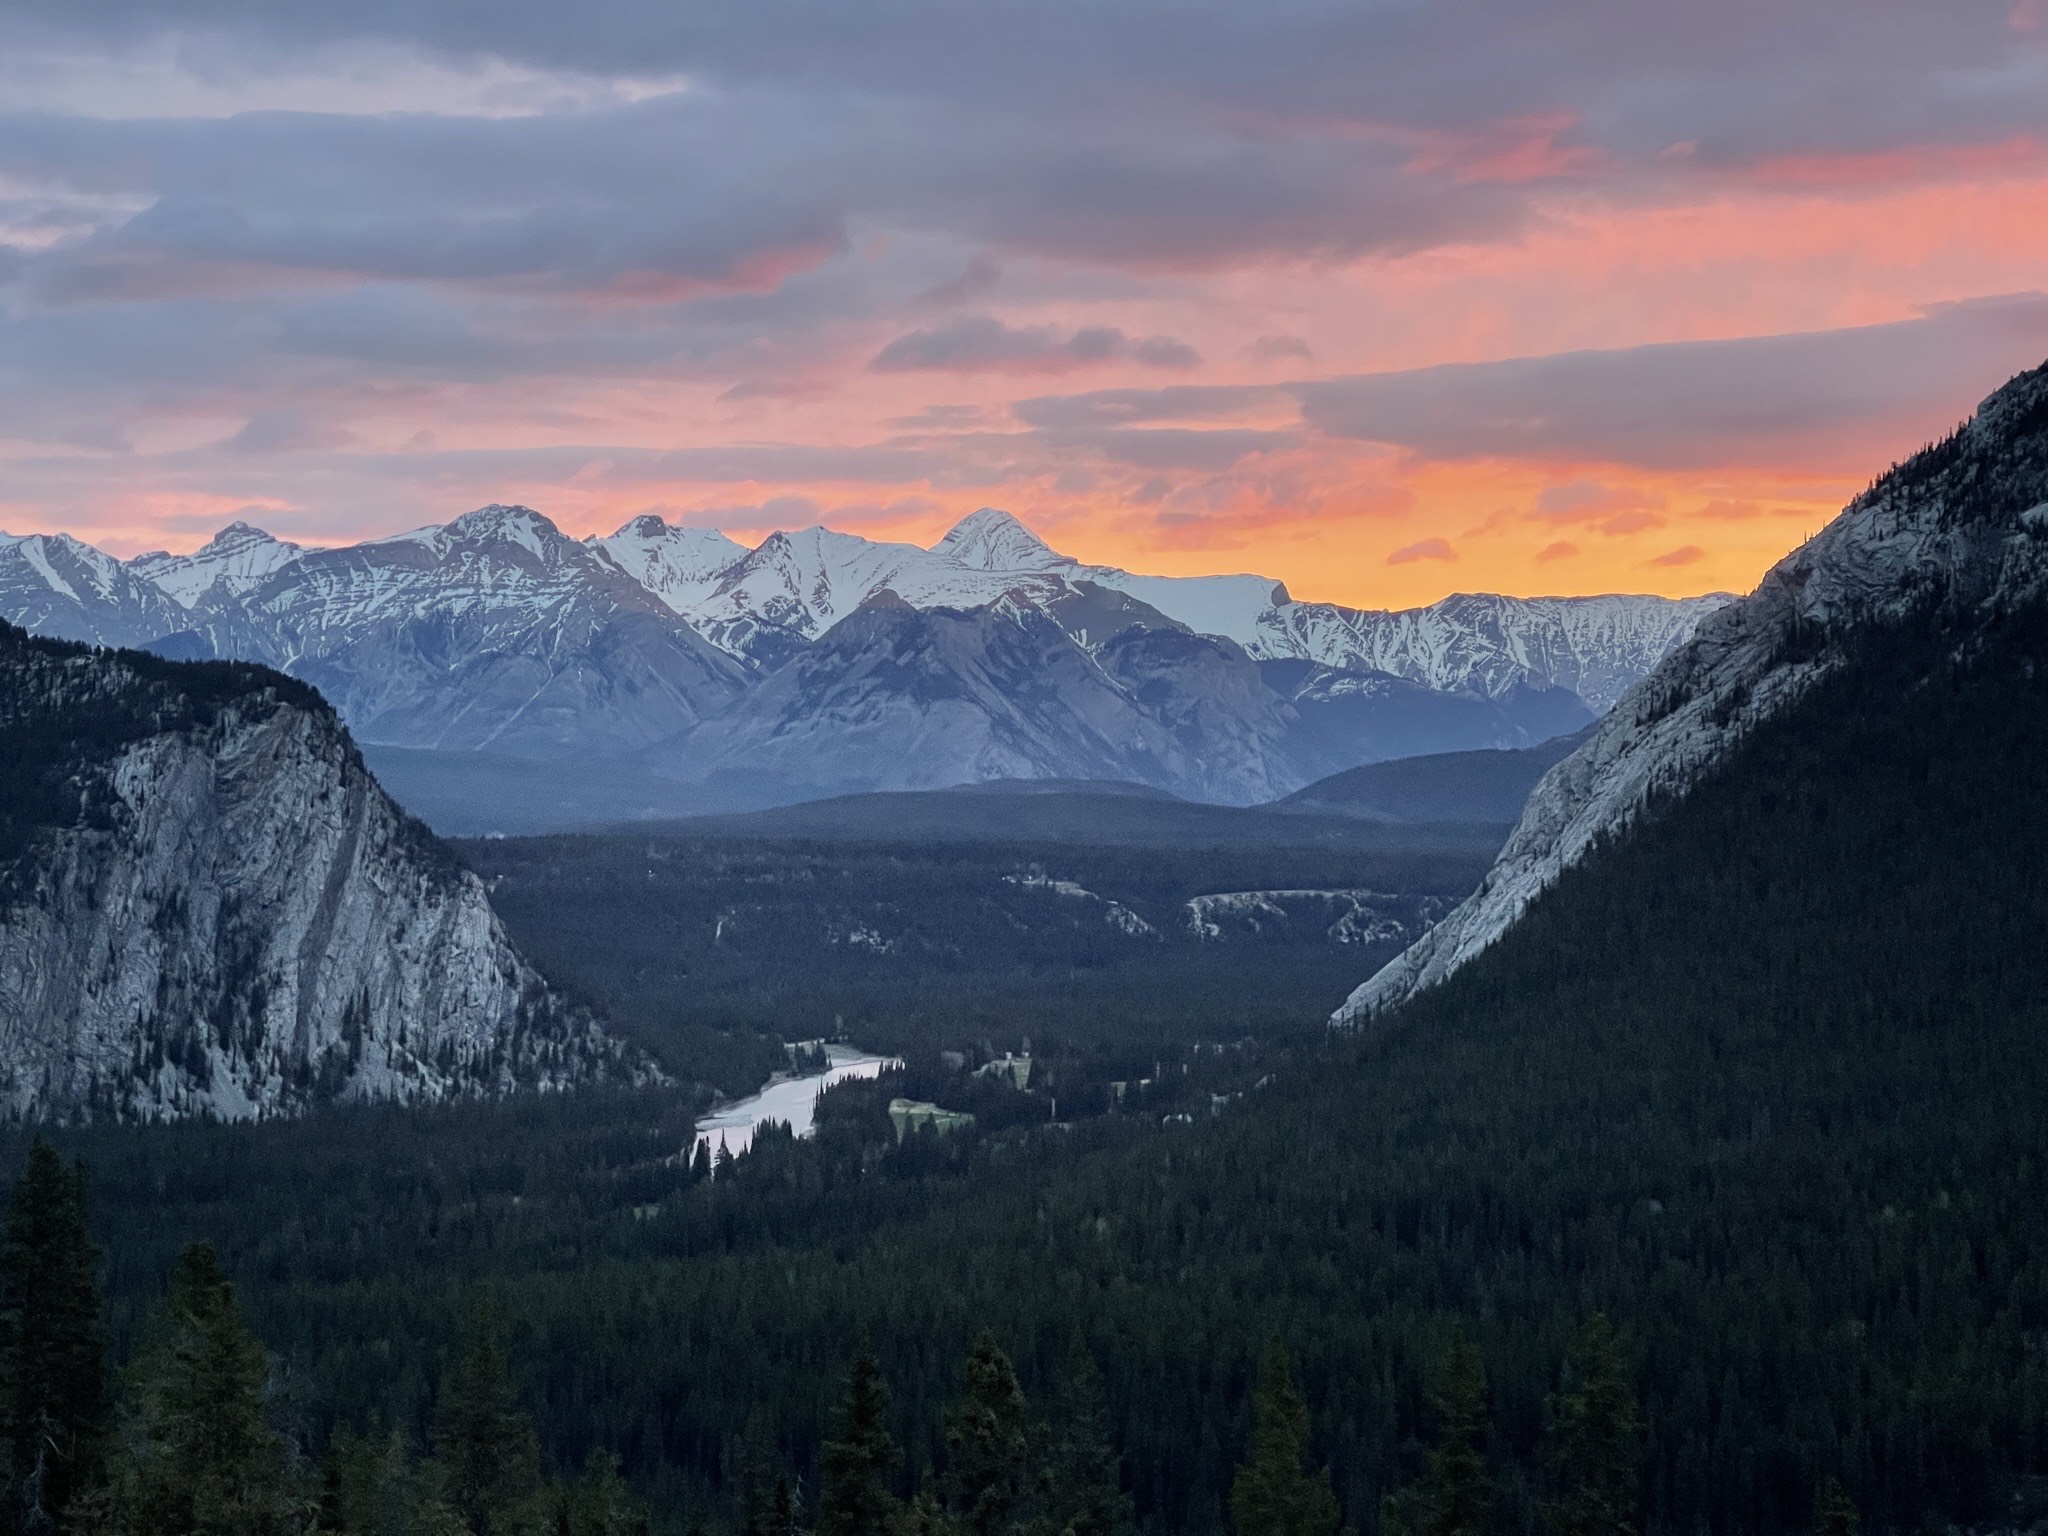 Photo of the Rocky Mountains in Banff, Alberta, Canada, at sunrise on May 18, 2022, at 5:38 am using an iPhone 14 Pro Max